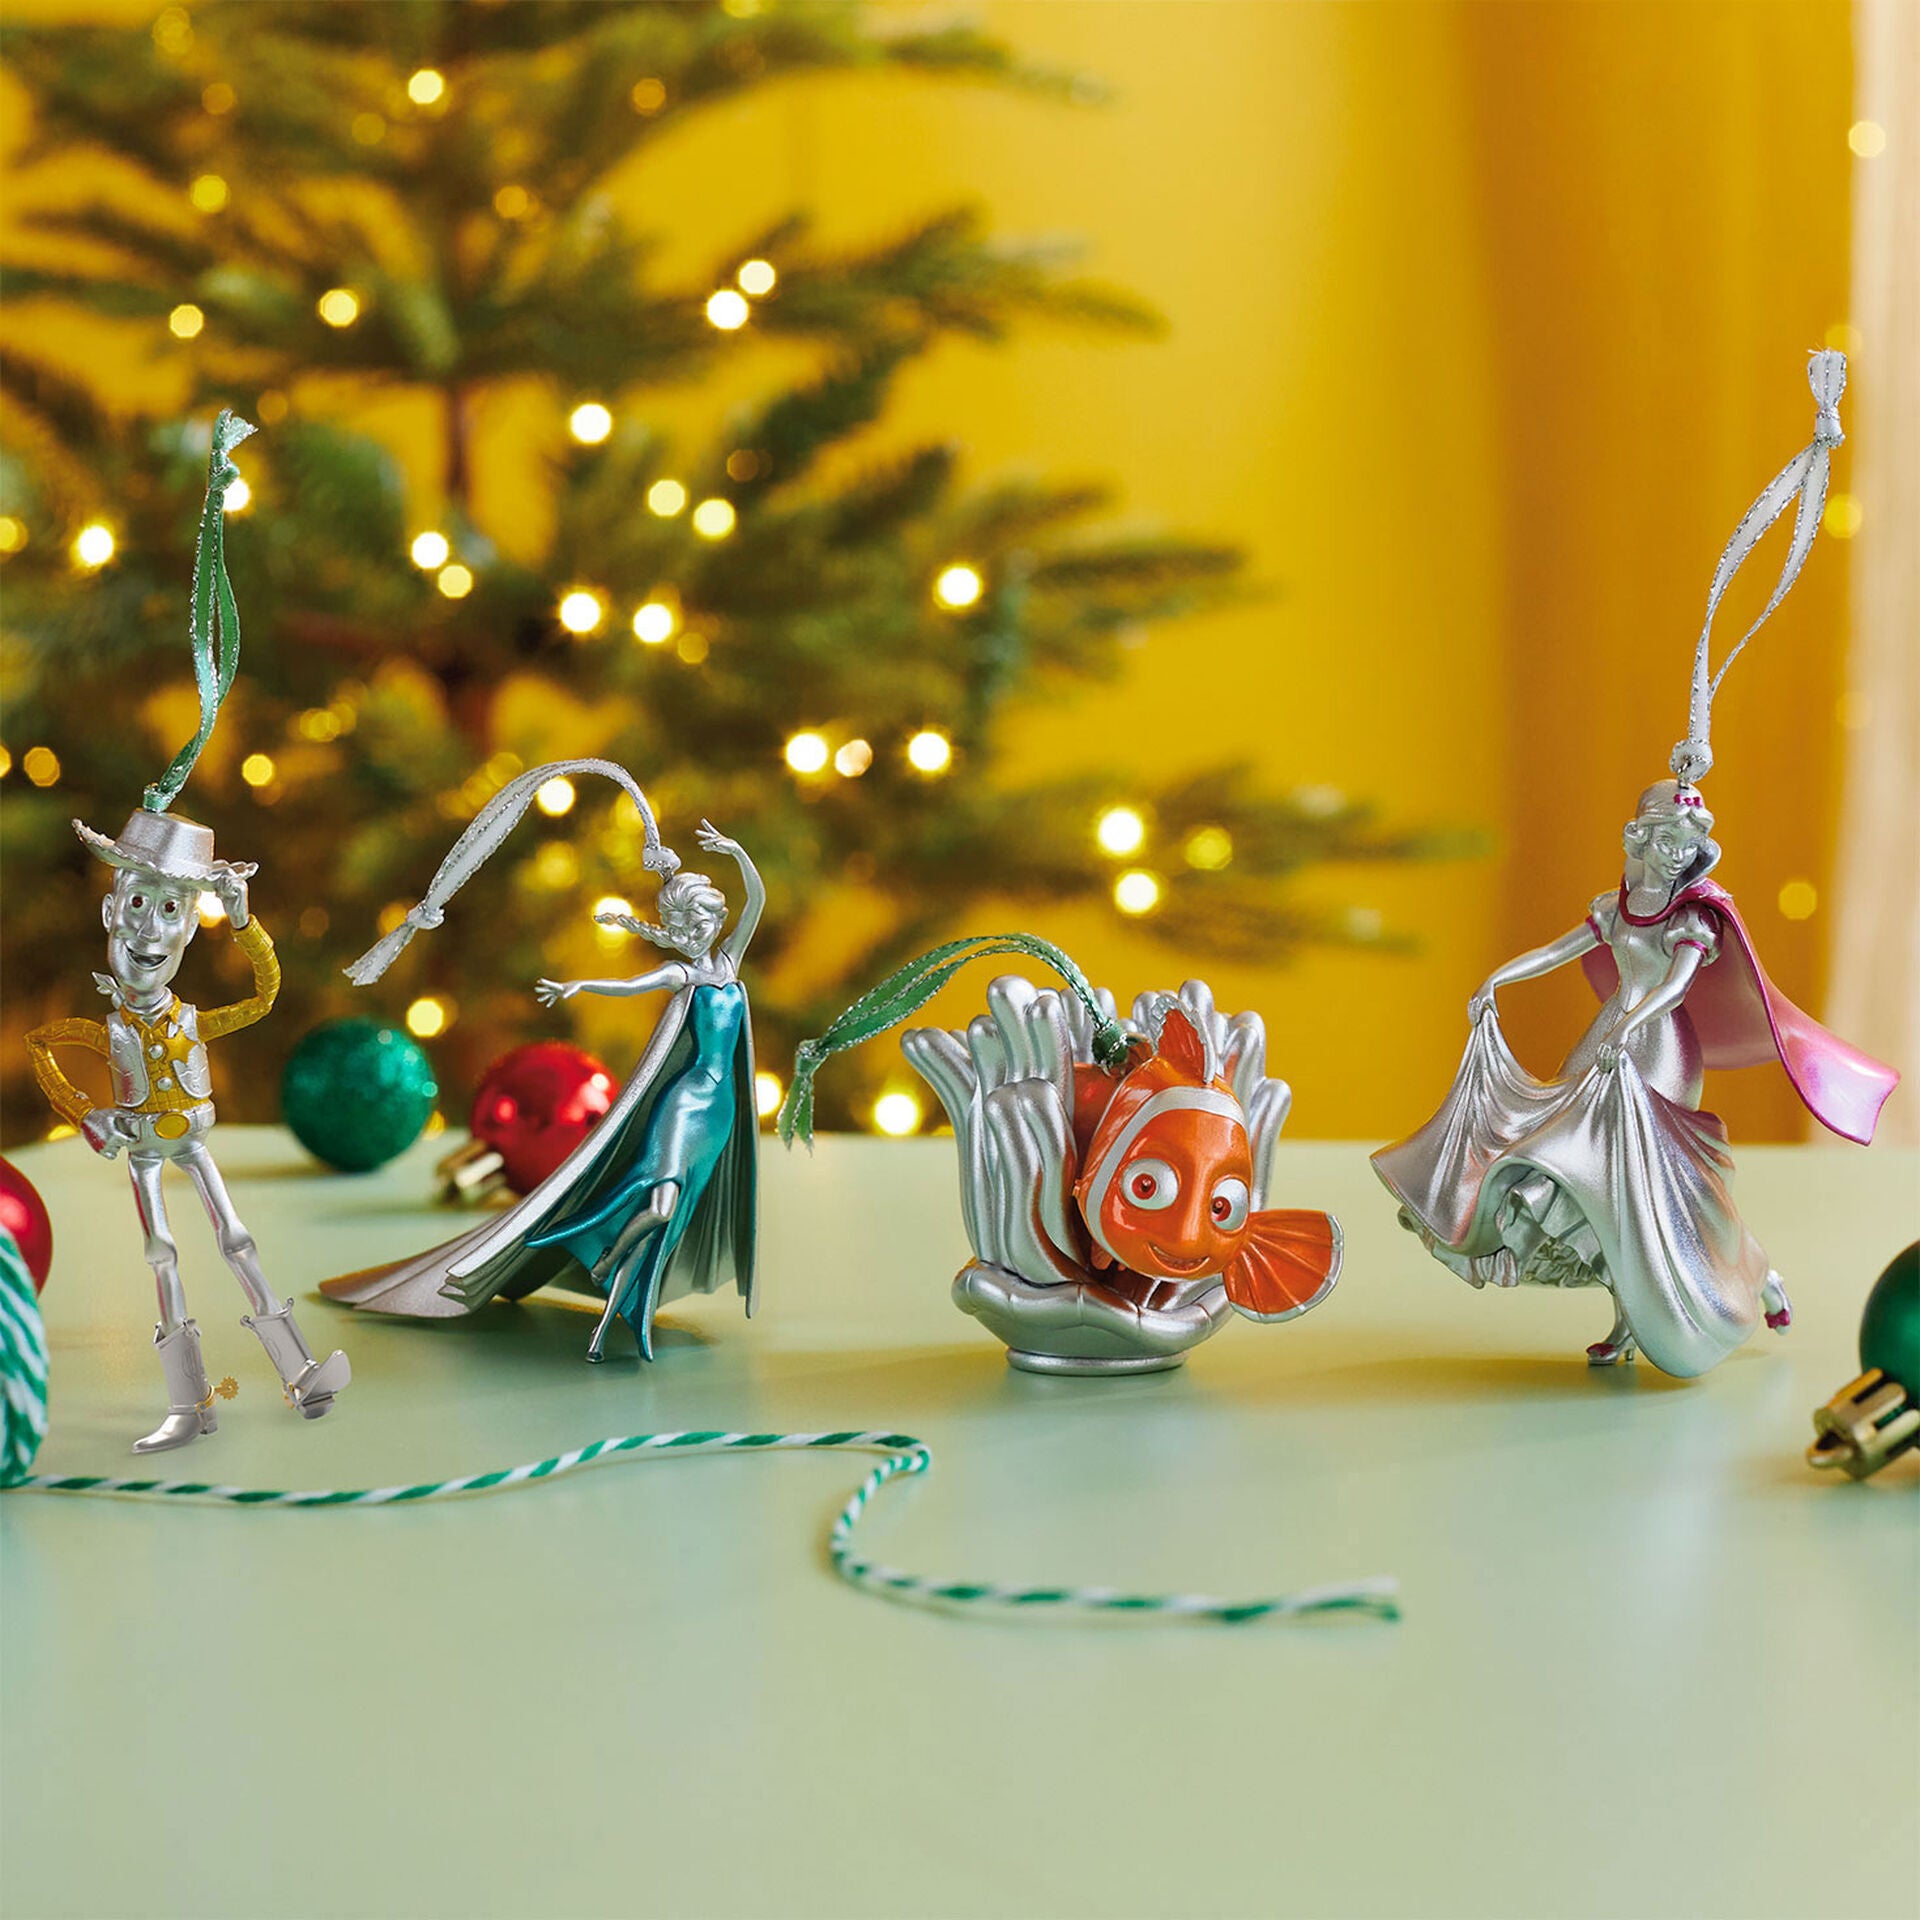 Four metallic silver Disney character Christmas ornaments. The characters from left to right are Woody, Elsa, Nemo, and Snow White.